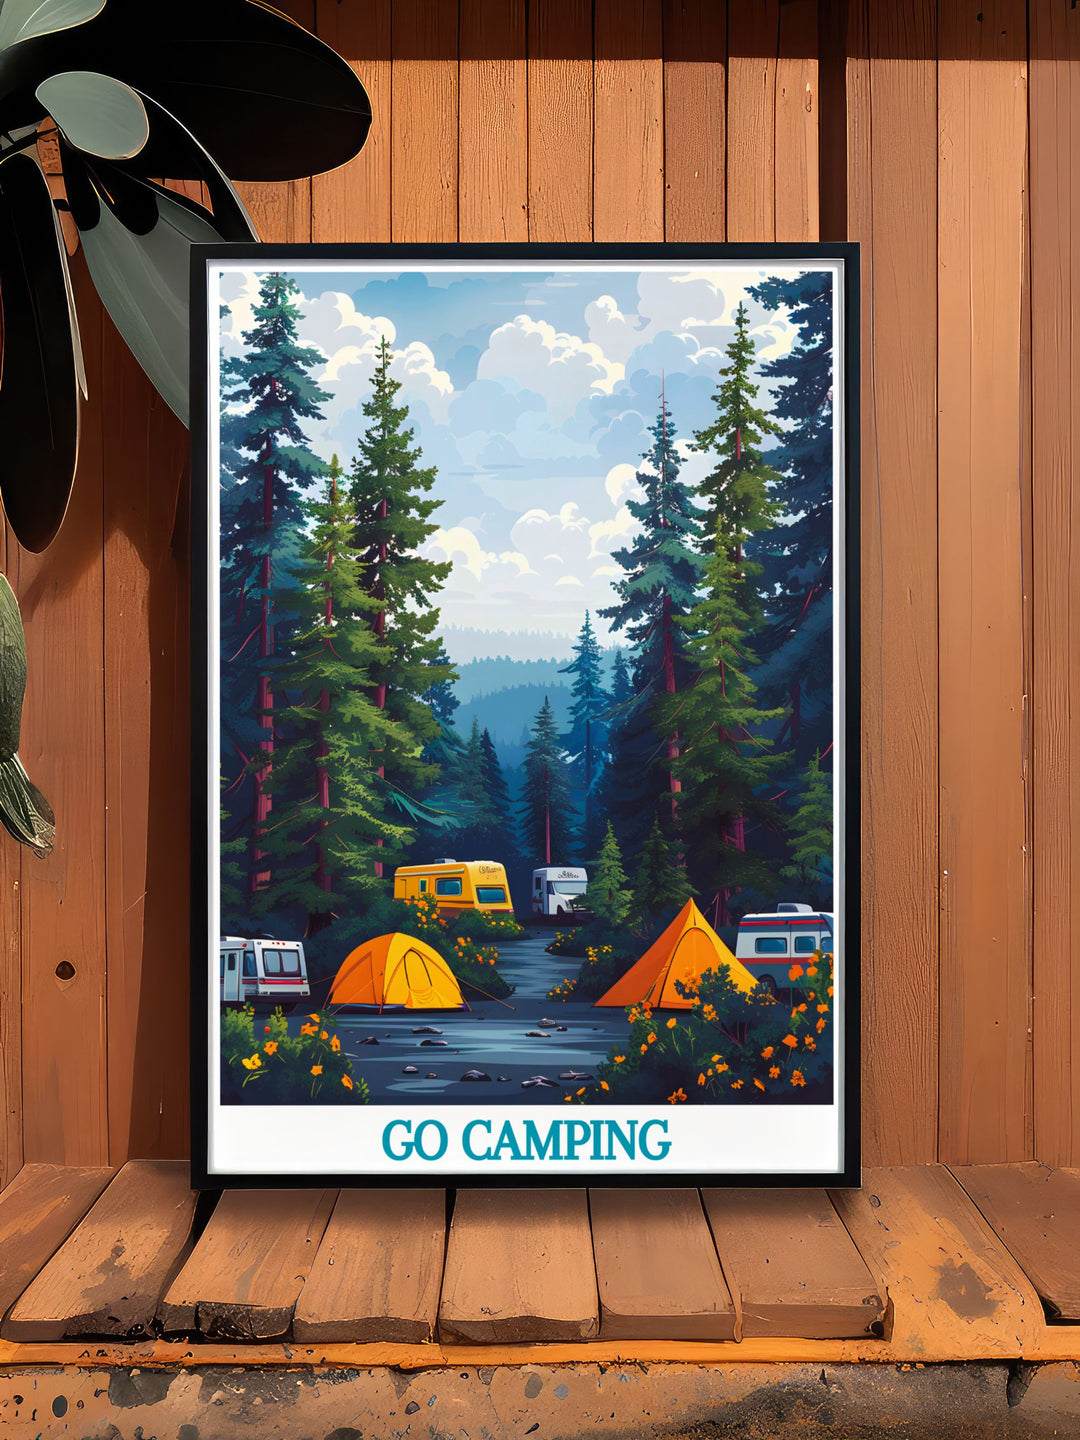 Home decor print featuring a vintage camper van in a forest setting, showcasing the scenic beauty and peaceful retreat of camping, a wonderful addition for any room.